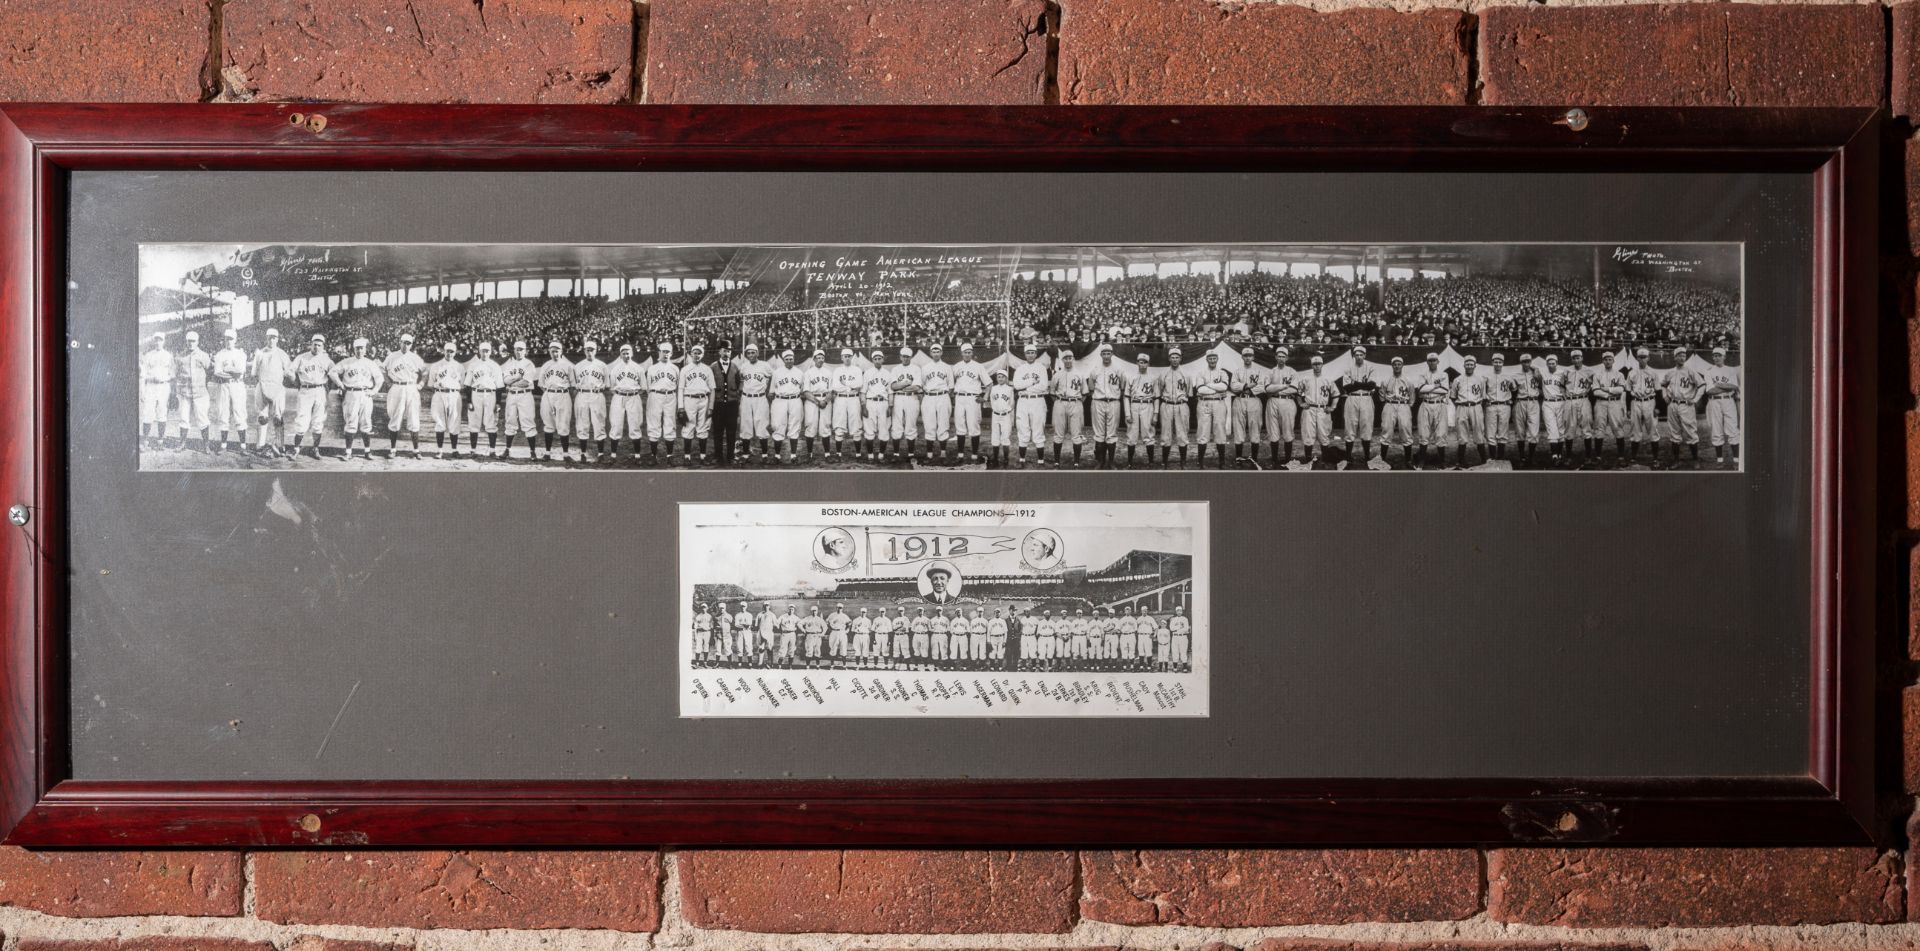 1912 Opening Day Team Photo Red Sox Vs. Yankees Framed Photo 35"x14"